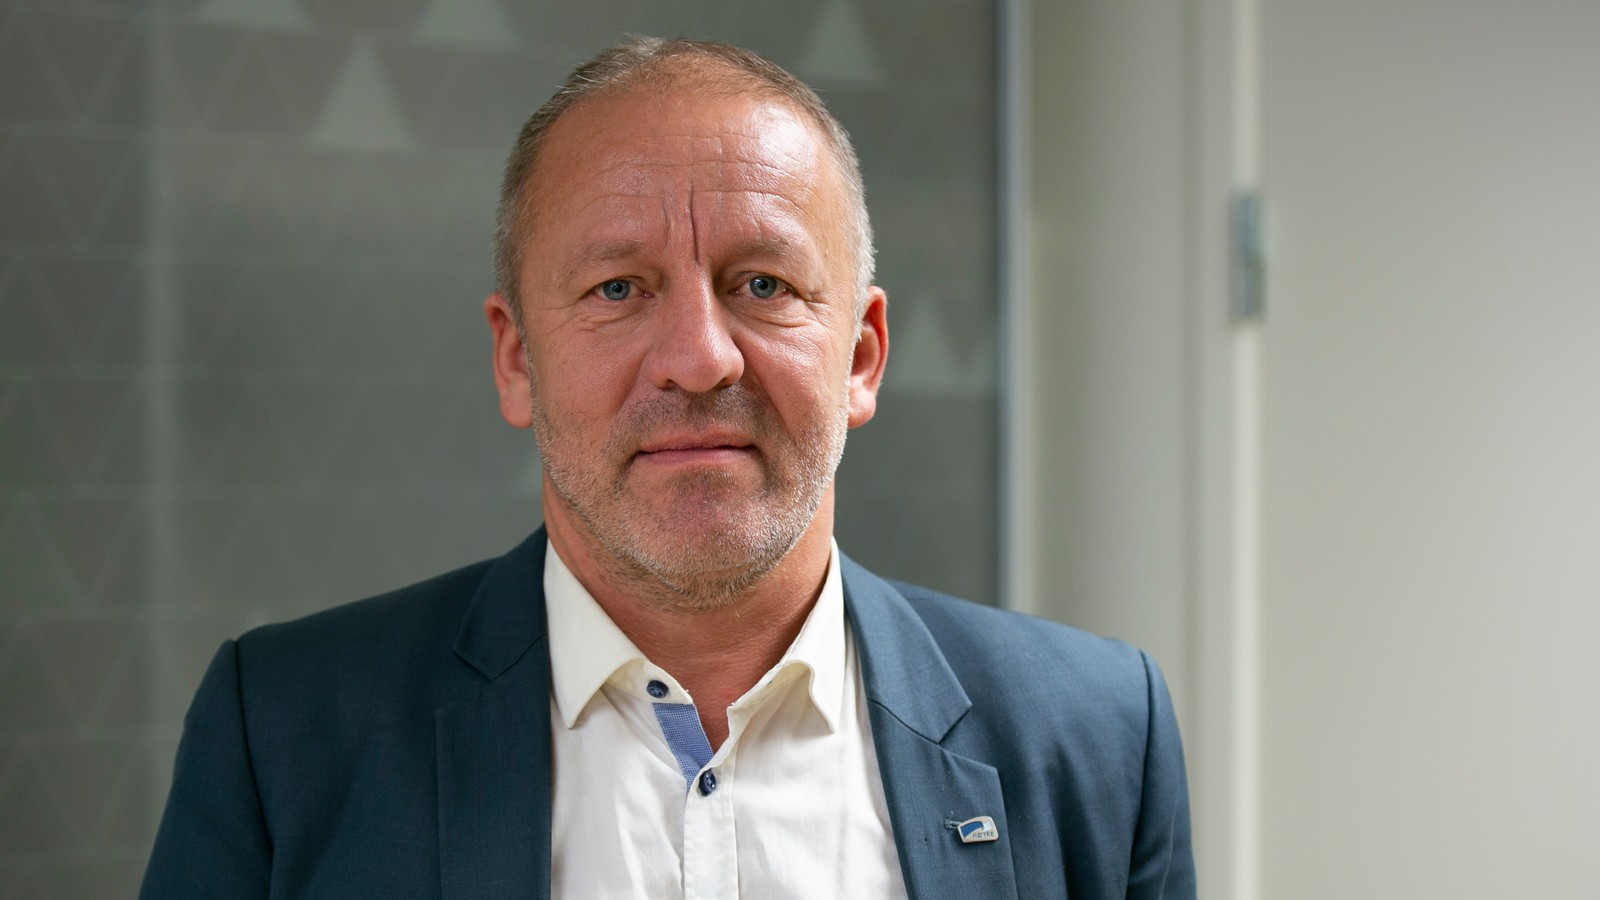 Geir Inge Sivertsen, Norway's fisheries minister has offered to resign